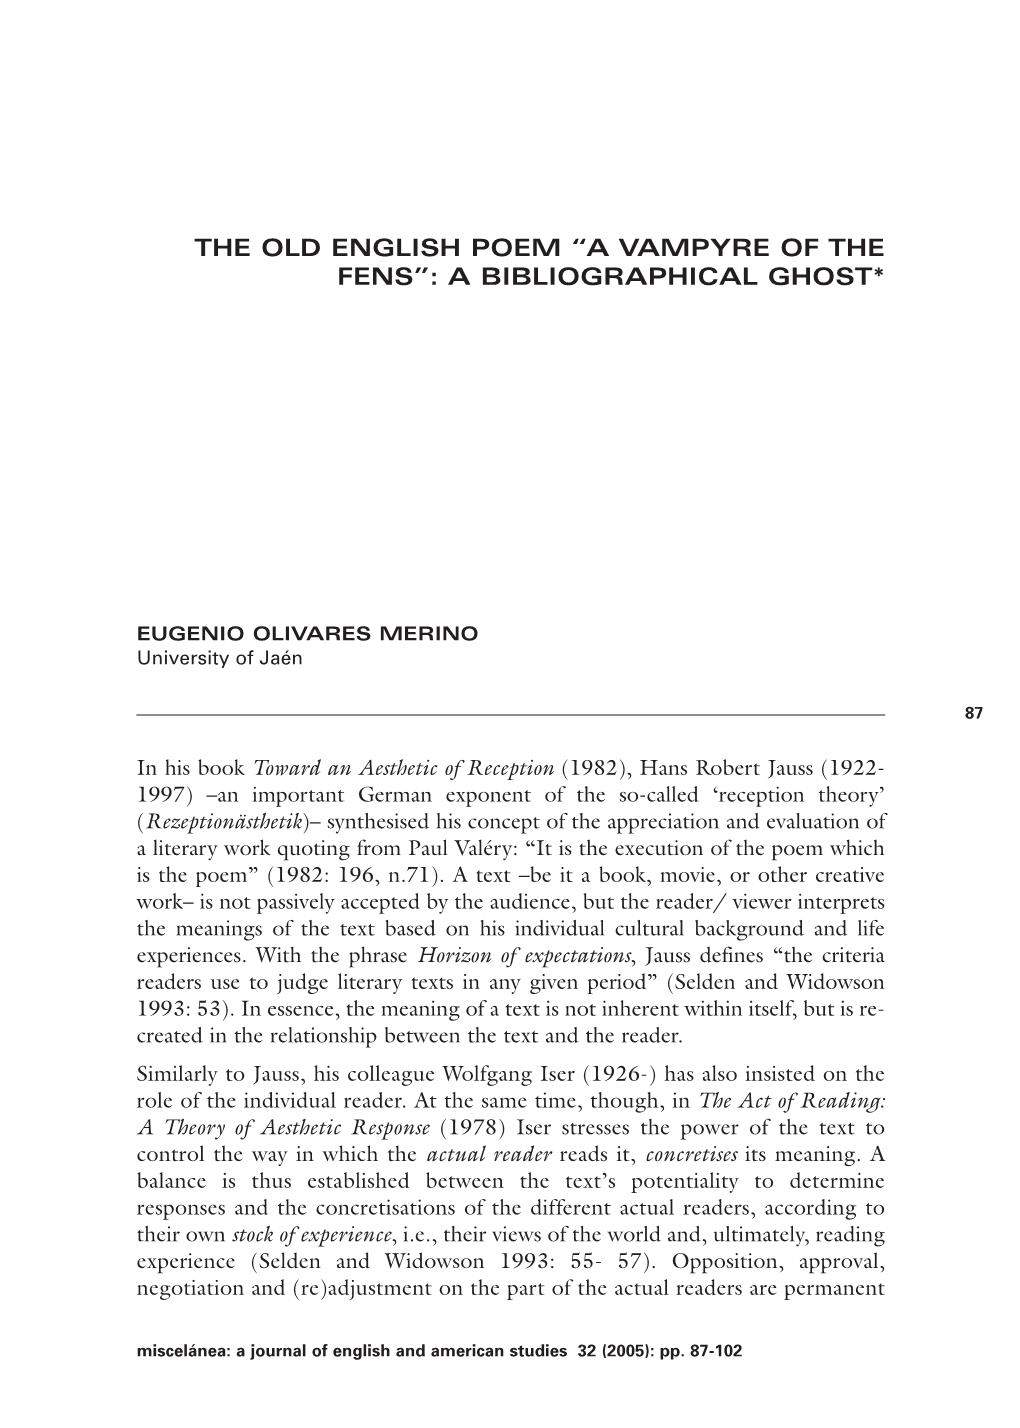 The Old English Poem “A Vampyre of the Fens”: a Bibliographical Ghost*